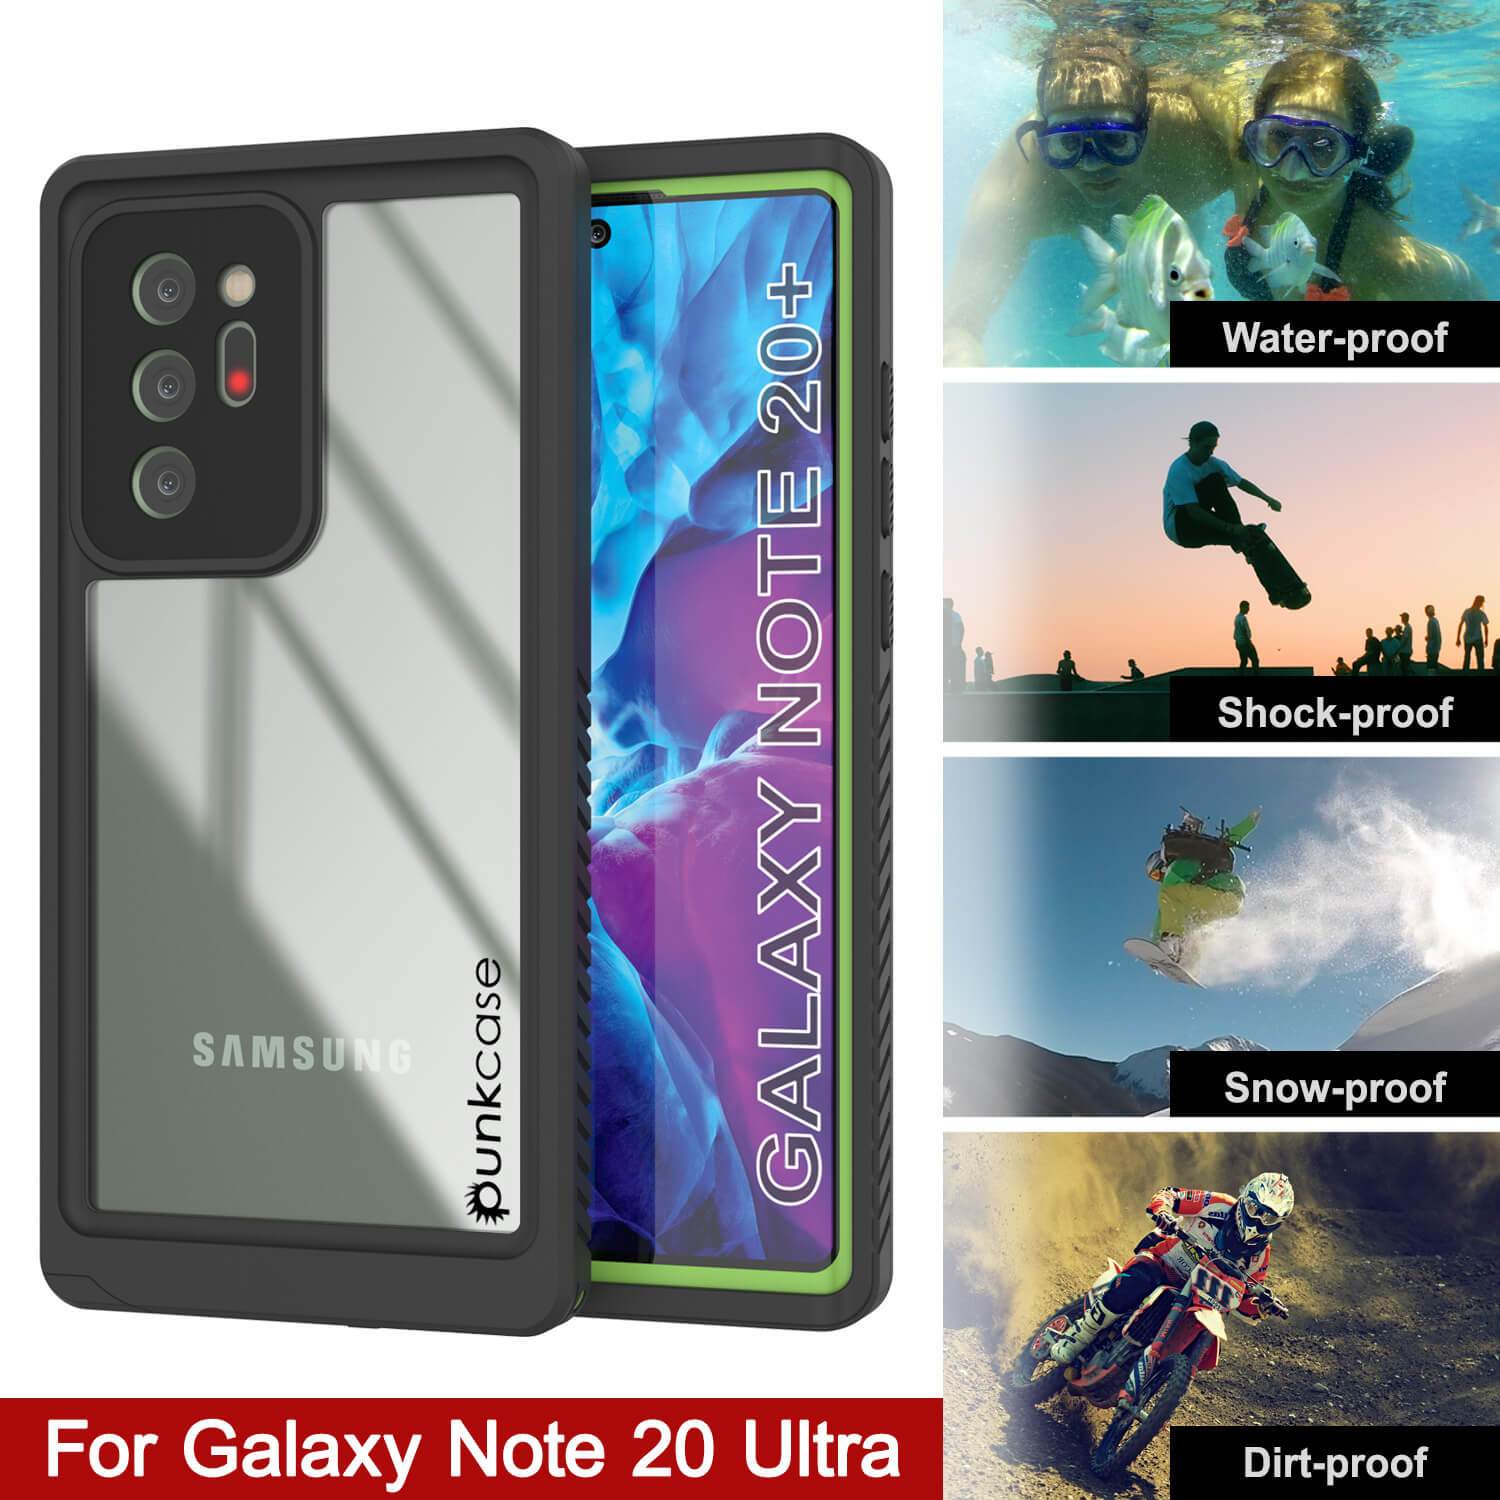 Galaxy Note 20 Ultra Case, Punkcase [Extreme Series] Armor Cover W/ Built In Screen Protector [Light Green]